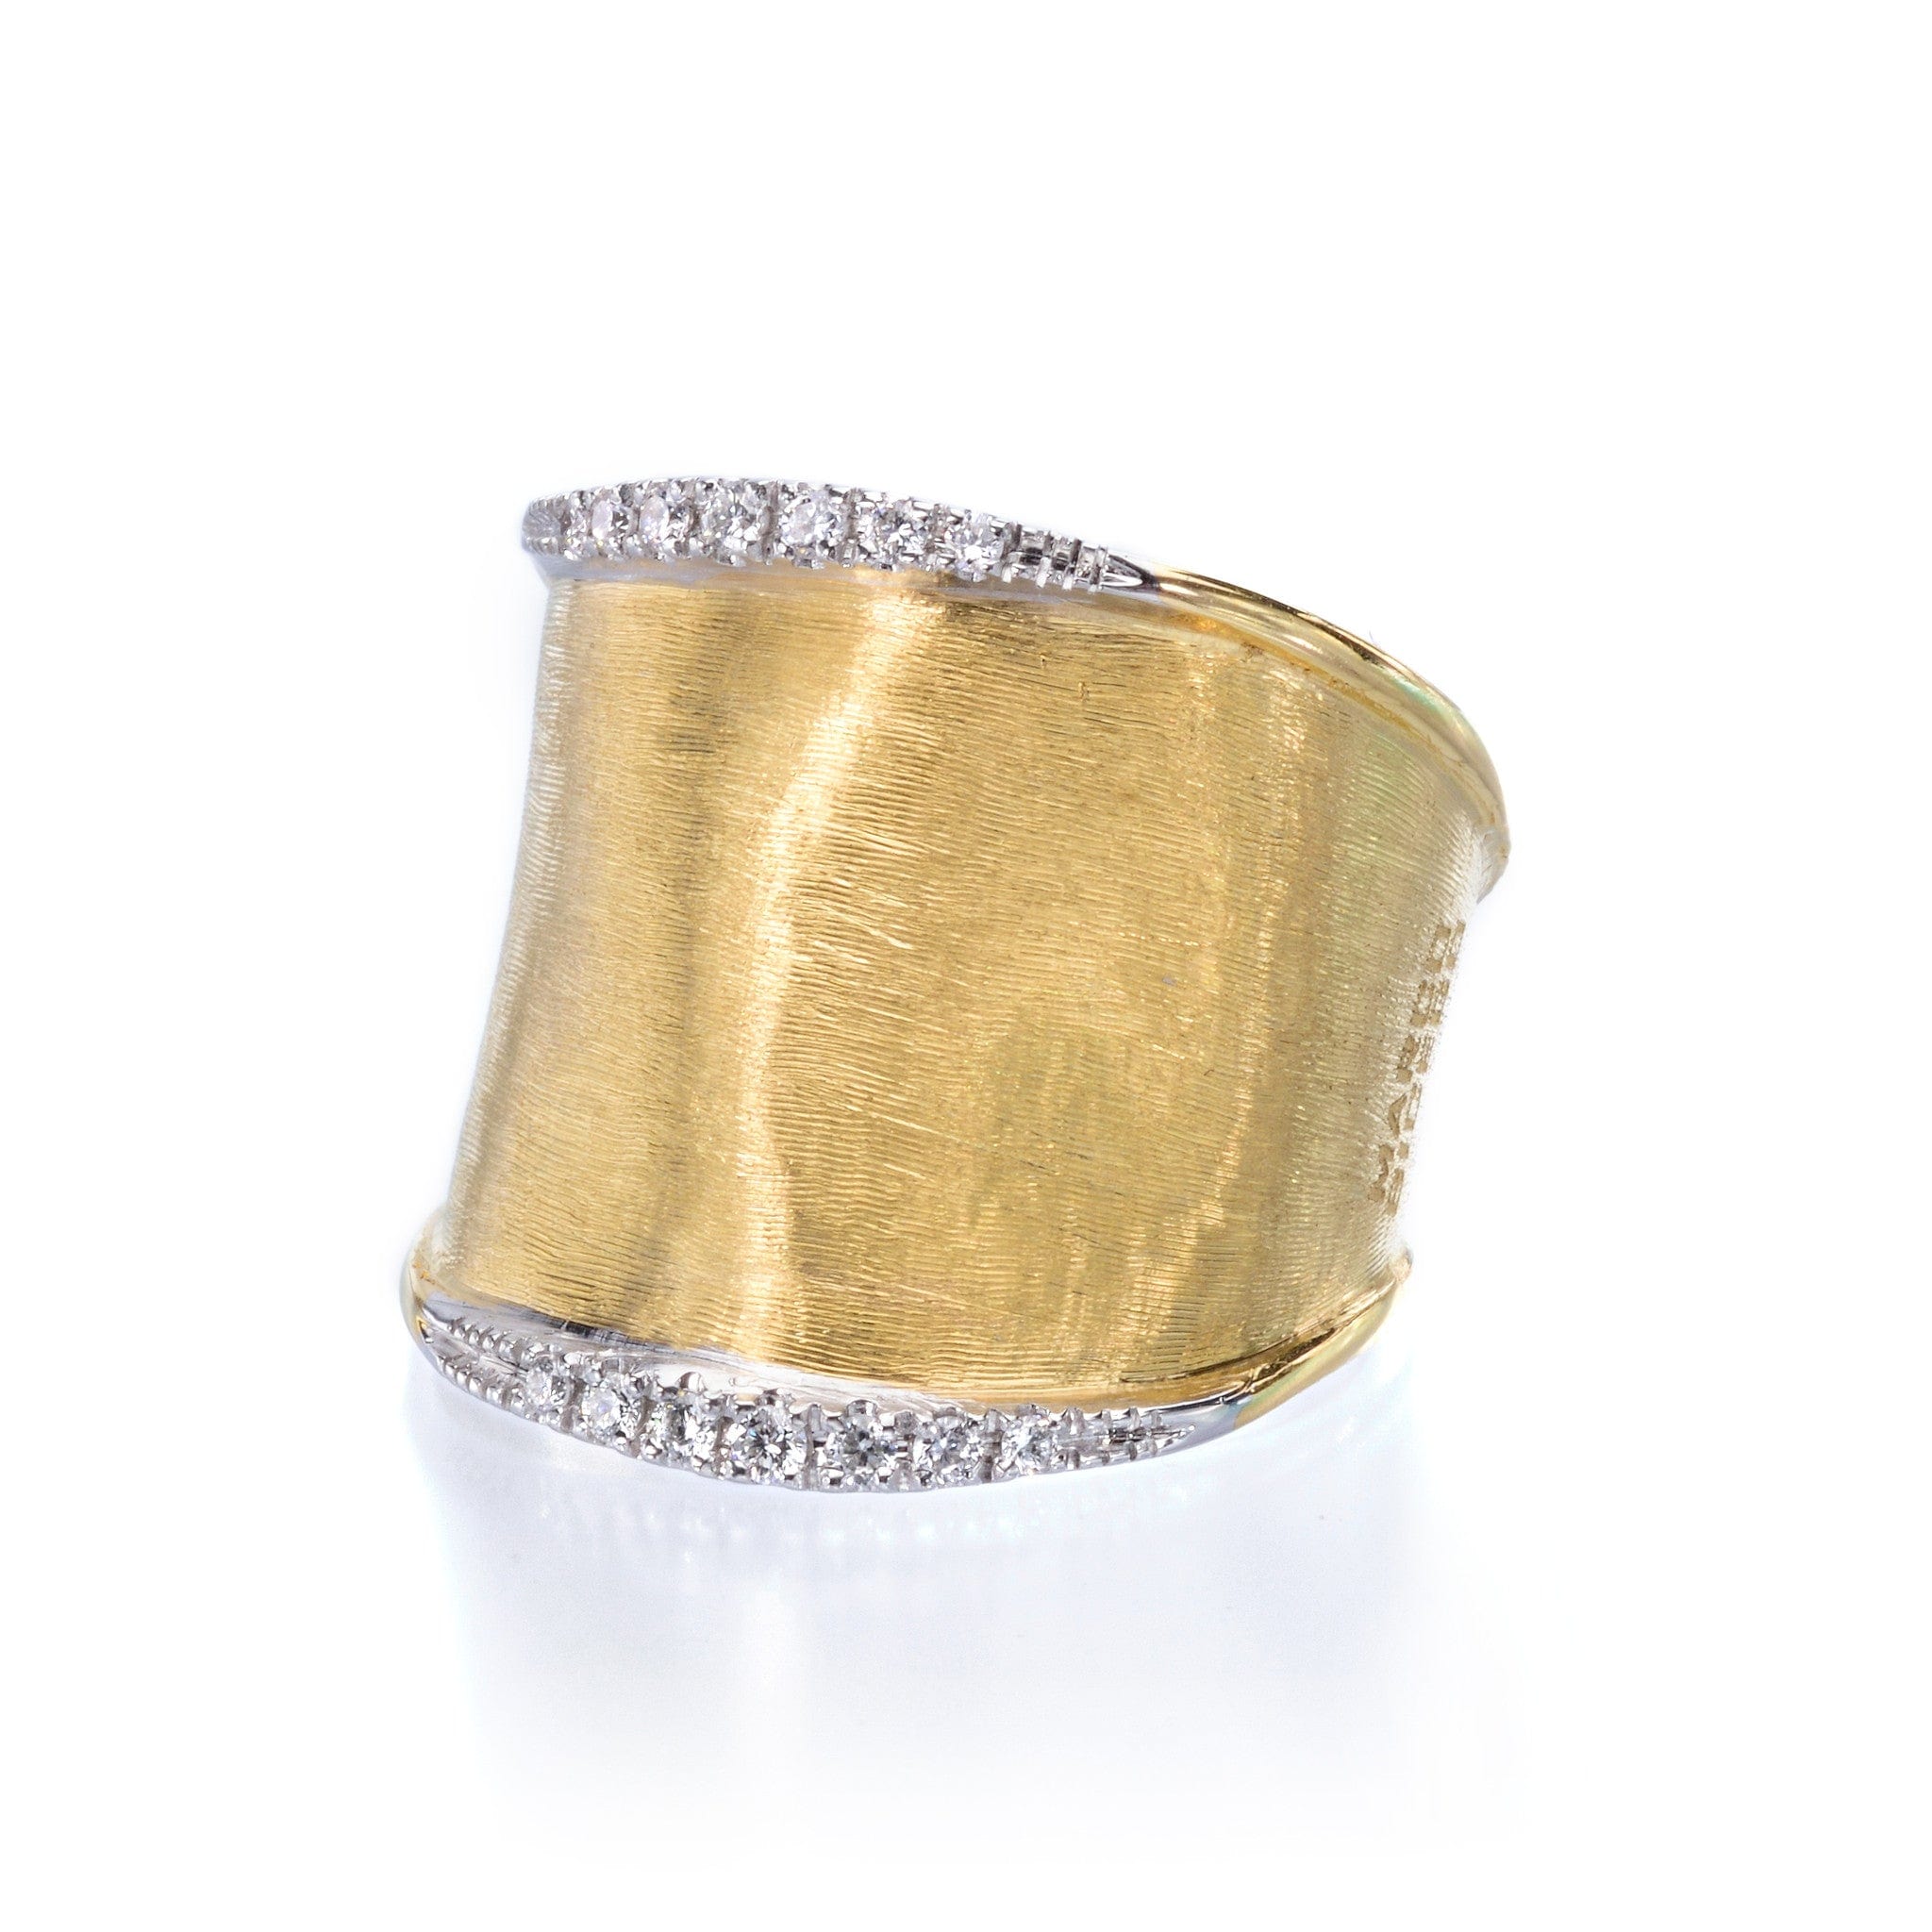 Marco Bicego Lunaria 18K Yellow Gold Ring with Diamonds